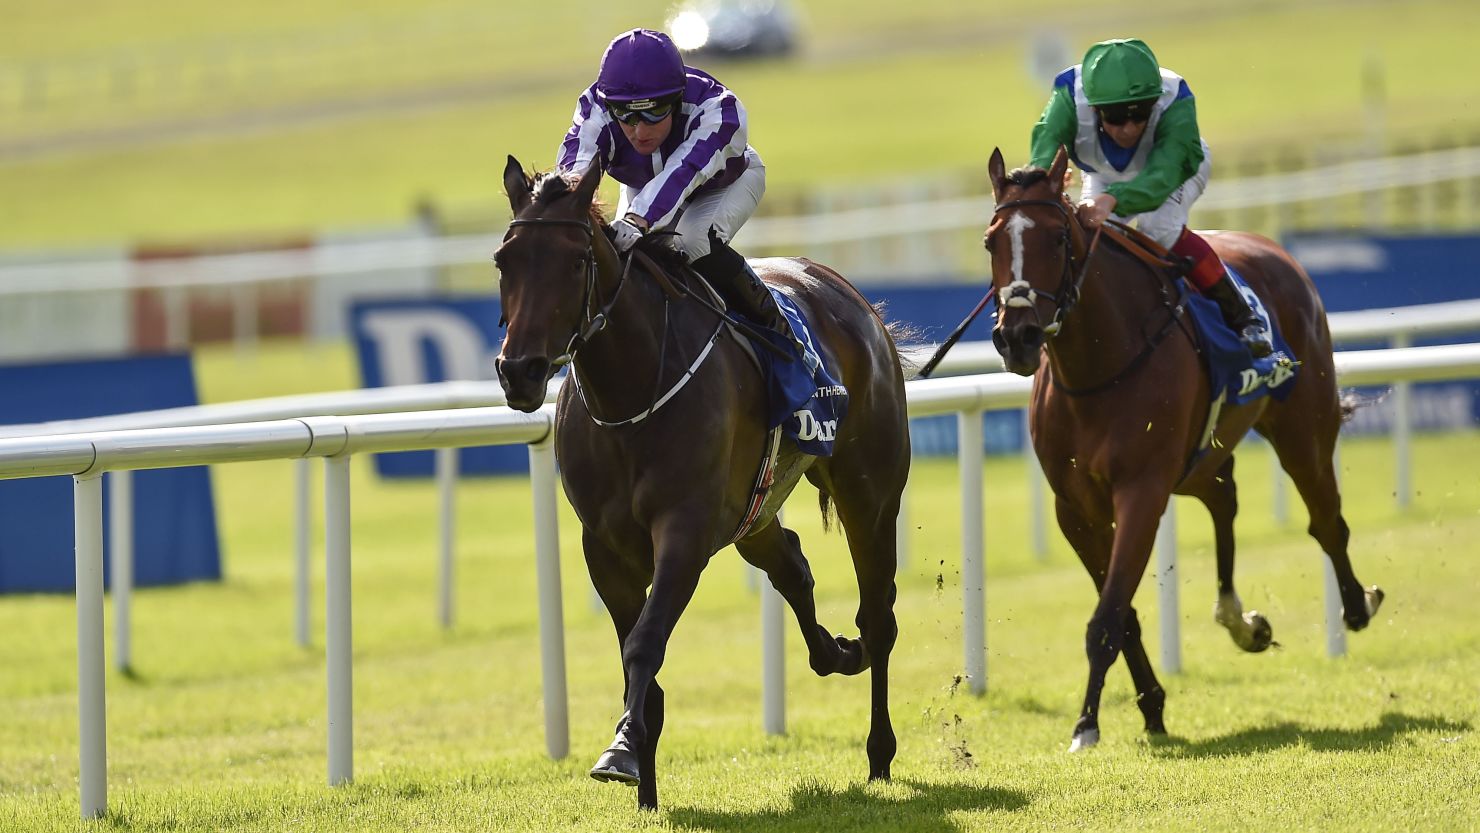 Seventh Heaven, left, with Seamie Heffernan up, pulls clear of Architecture, ridden by Frankie Dettori, to win the Irish Oaks at the Curragh.